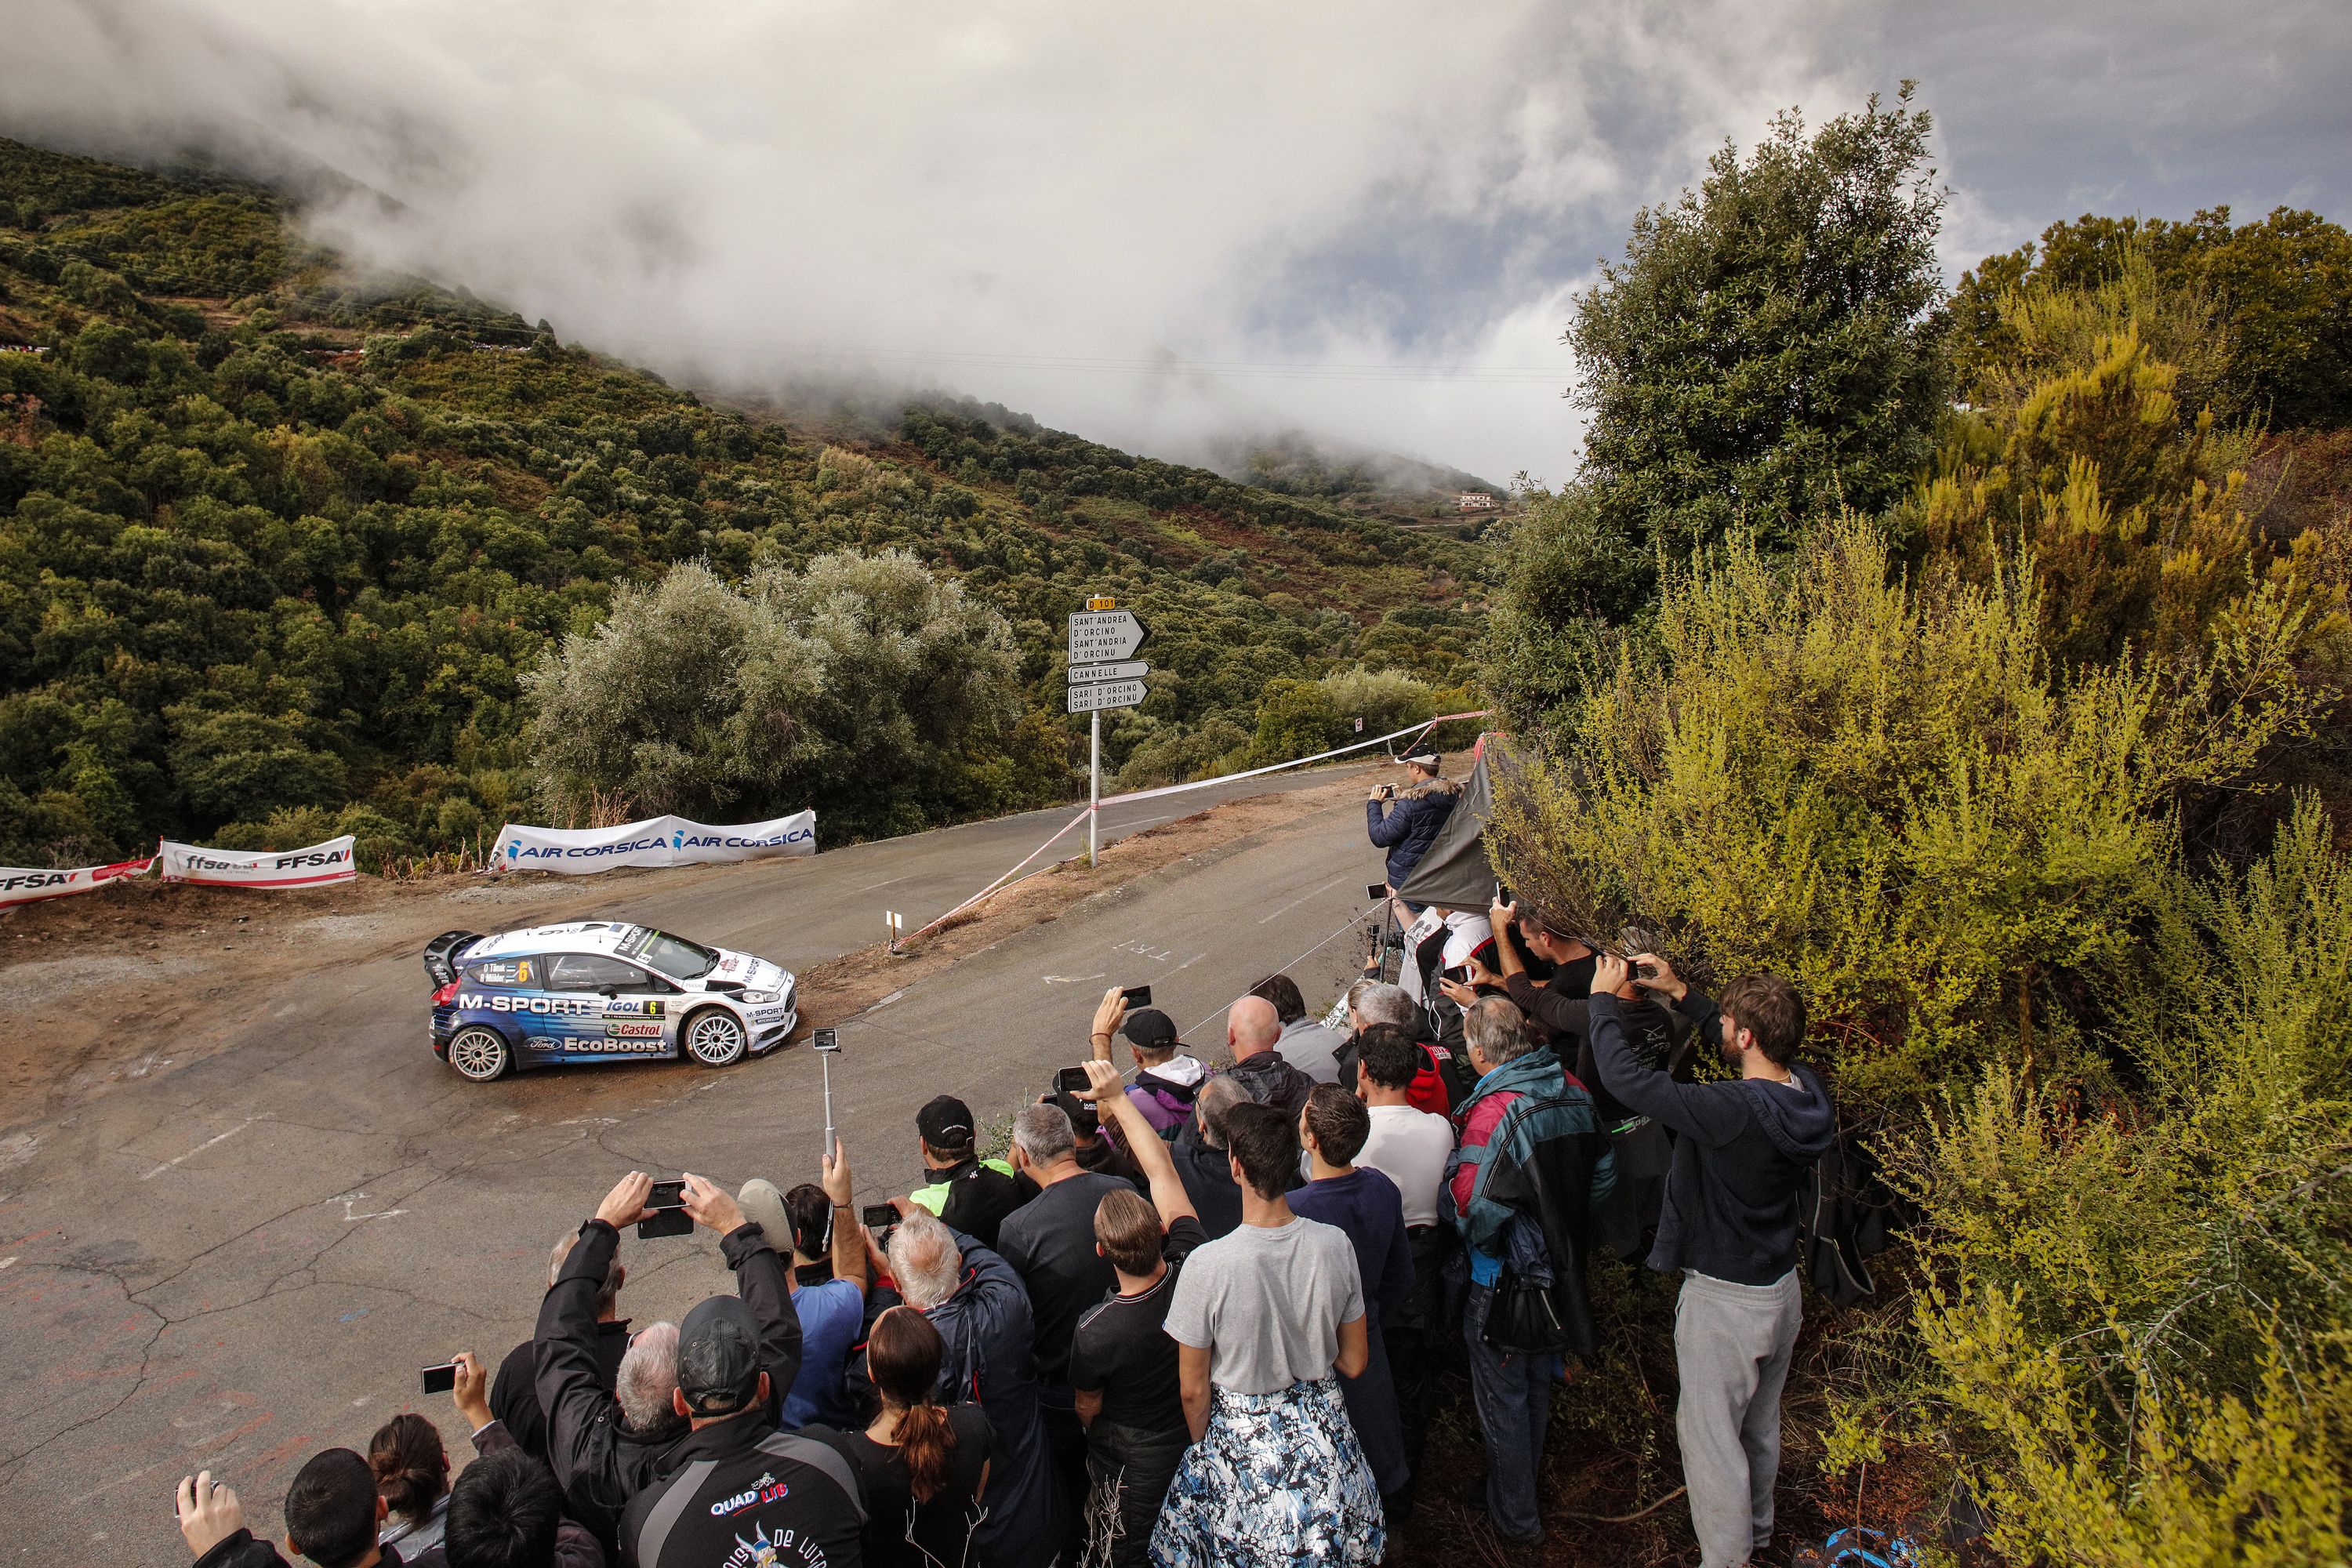 EVANS AND M-SPORT LEAD THE WAY AT THE TOUR DE CORSE